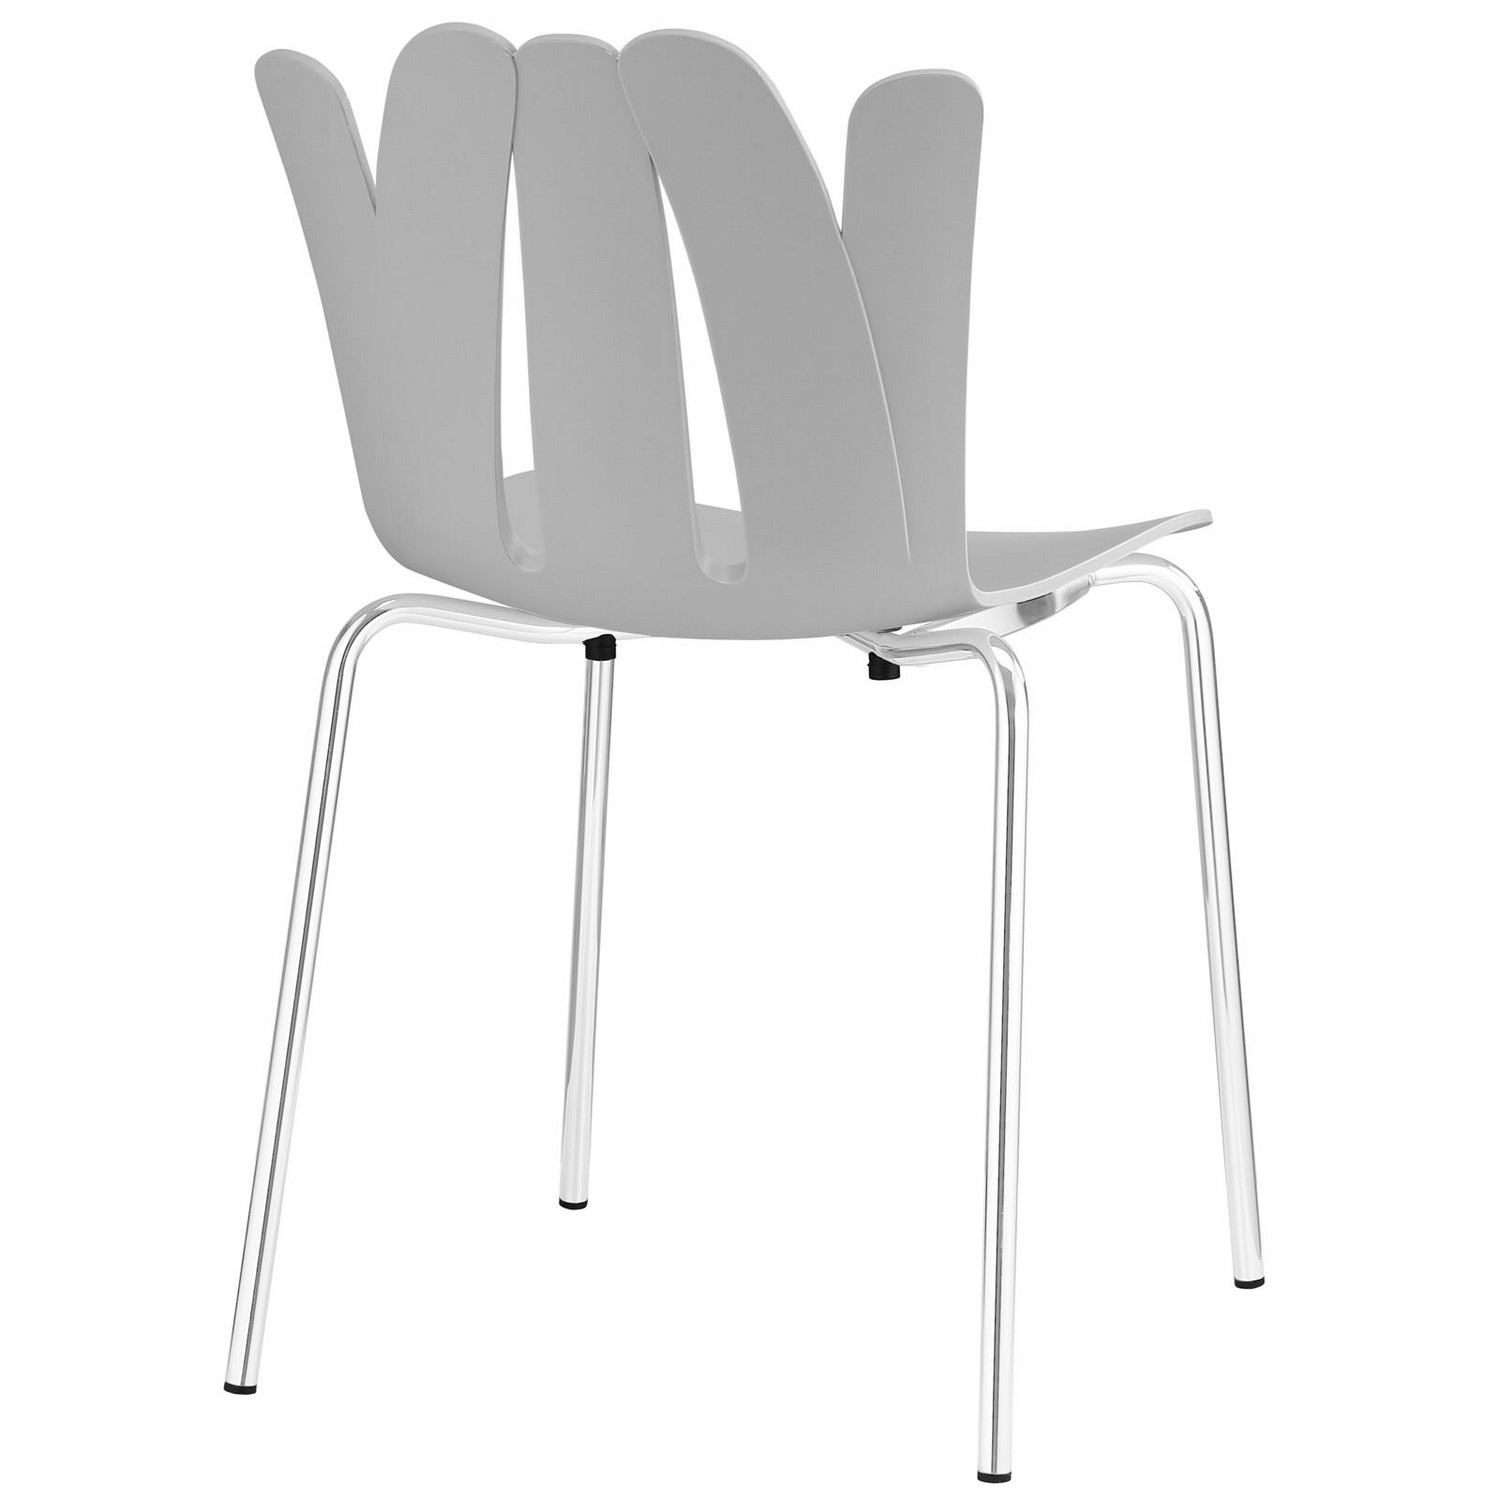 Modway Flare Dining Side Chair - Gray